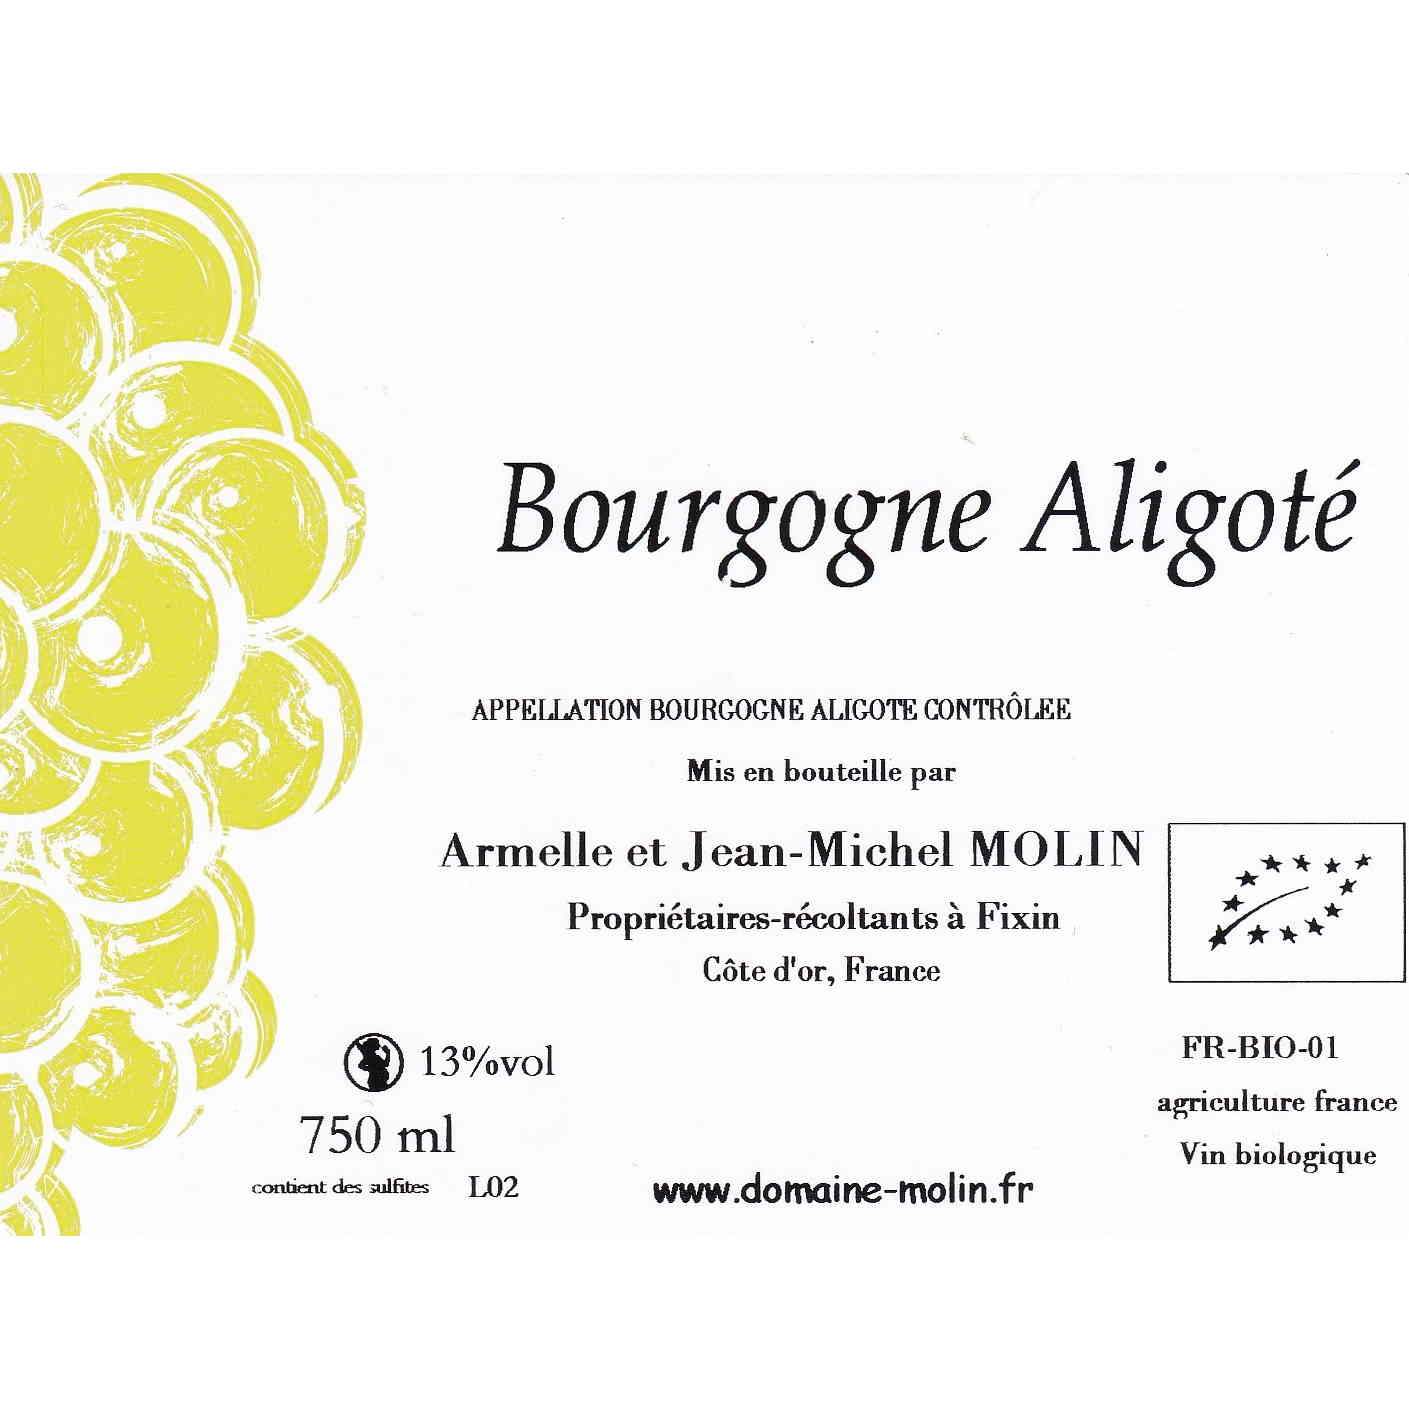 Shop Domaine Armelle et Jean-Michel Molin Domaine Armelle et Jean-Michel Molin Bourgogne Aligote 2018 online at PENTICTON artisanal wine store in Hong Kong. Discover other French wines, promotions, workshops and featured offers at pentictonpacific.com 